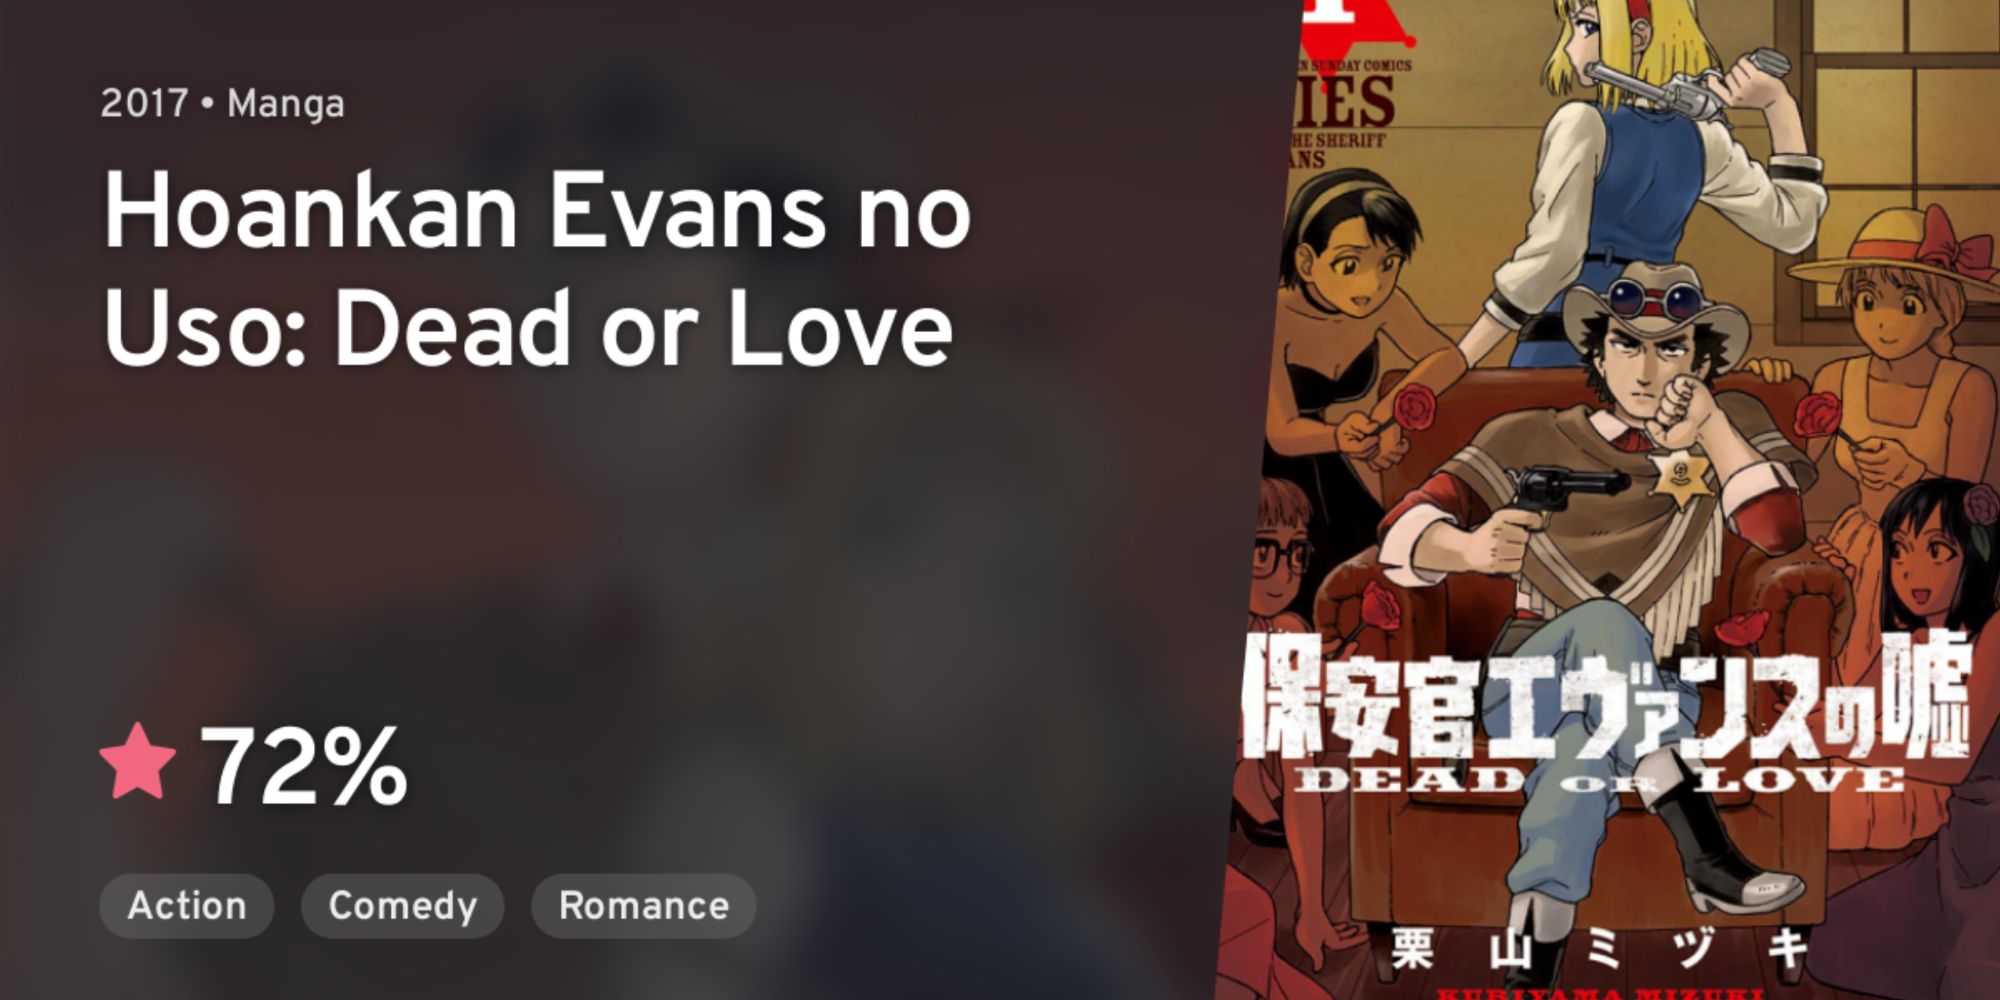 Lies of the Sheriff Evans: Manga Dead or Love